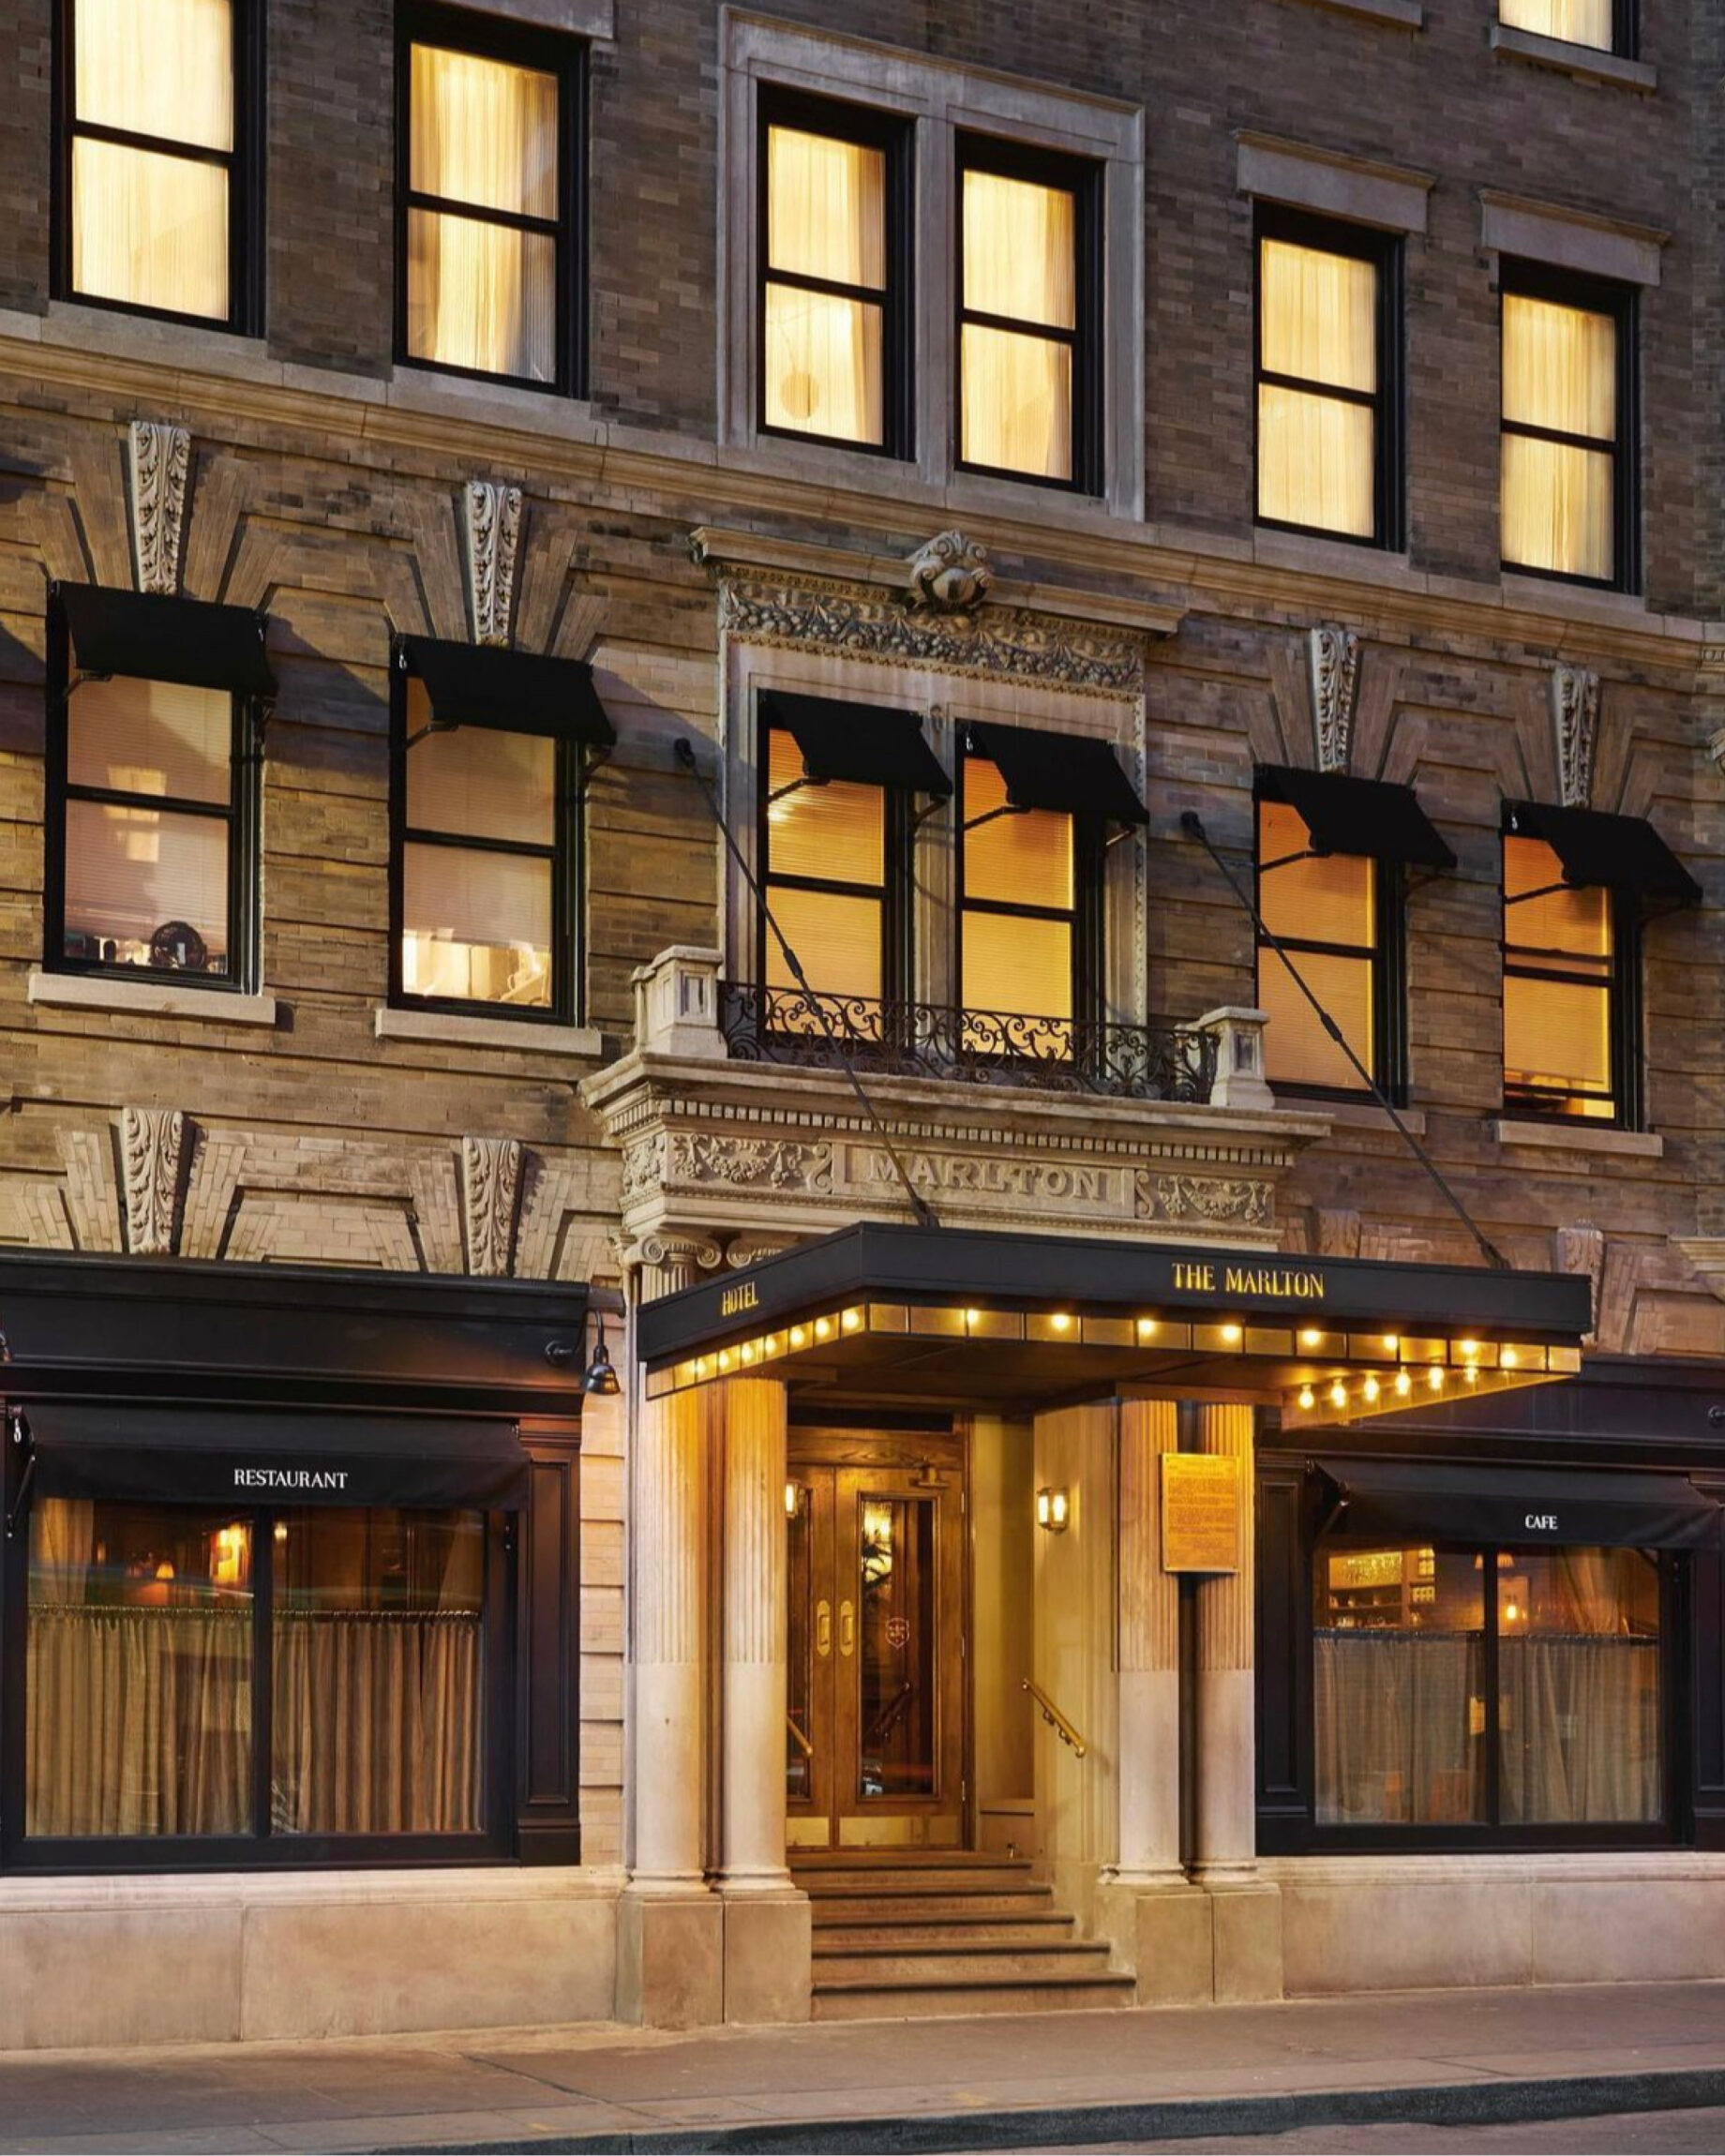 The best co-working spaces for remote working in New York City | Exterior of the Marlton Hotel with golden lighting in front of the door